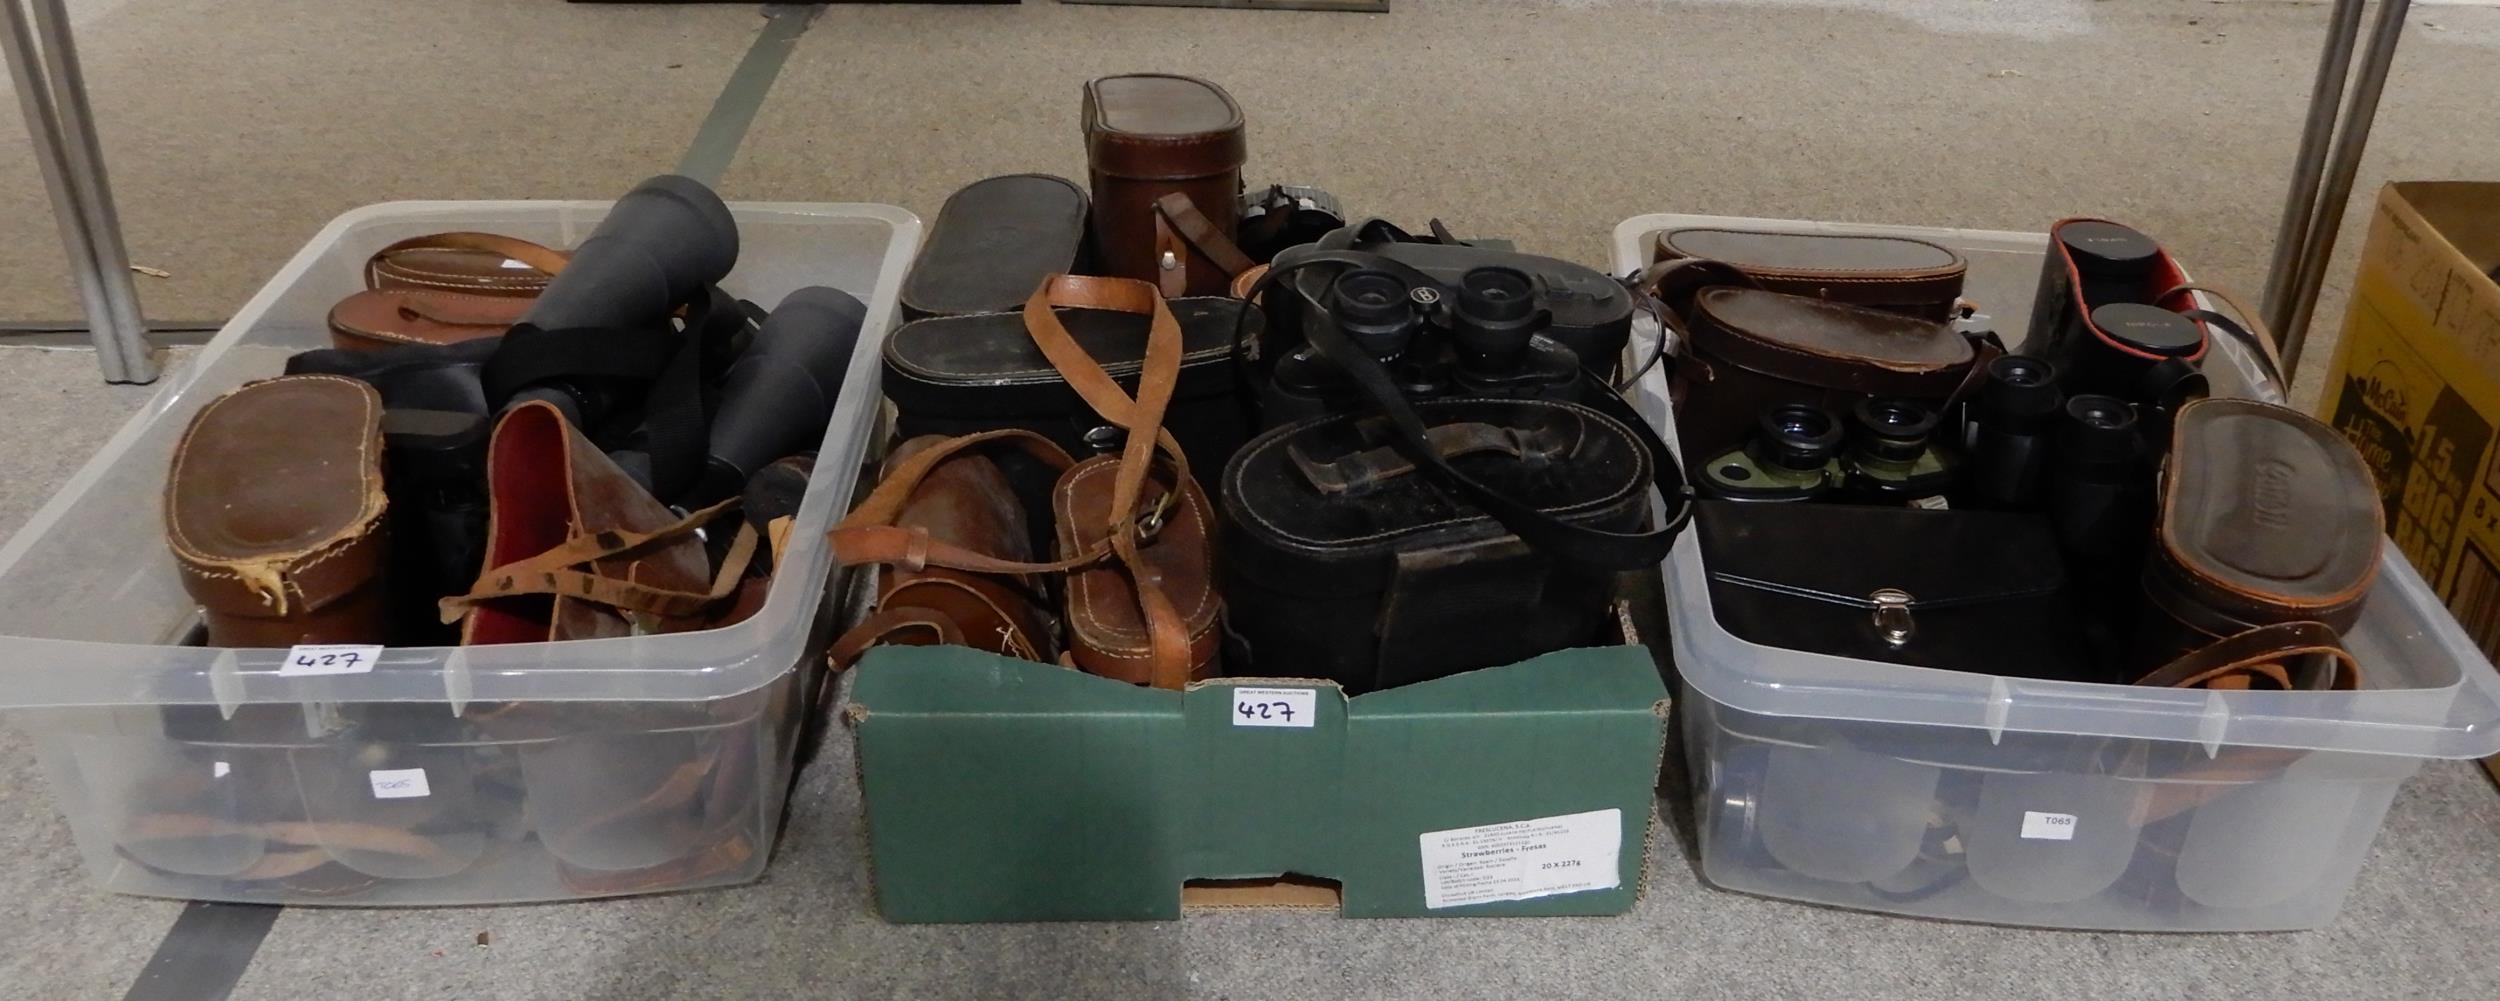 A quantity of binoculars various makers and models Carl Zeiss, Taylor Hobson, Tento etc Condition